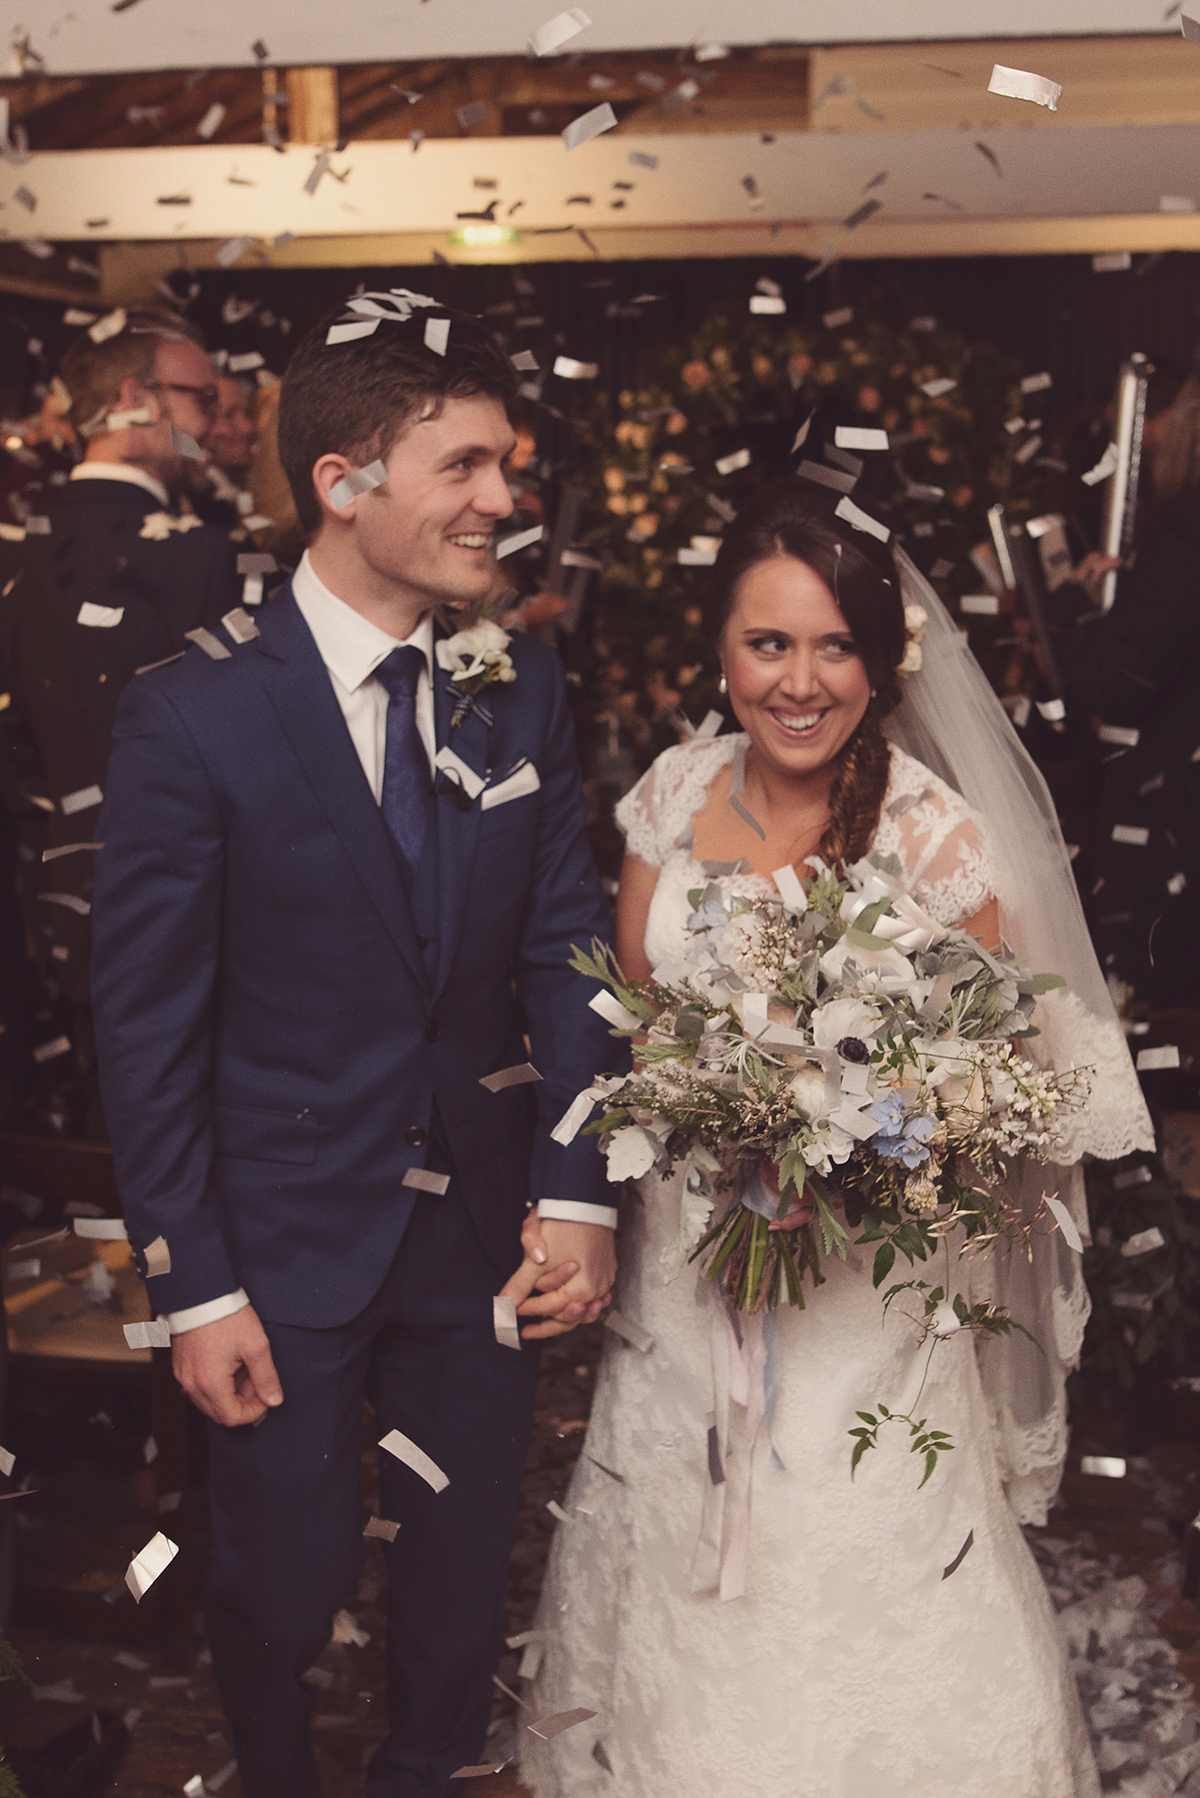 Florist Joanne of Joanne Truby Floral Design wore Stewart Parvin to marry her beau Steve by the sea in Whitstable. Photography by Rebecca Douglas.